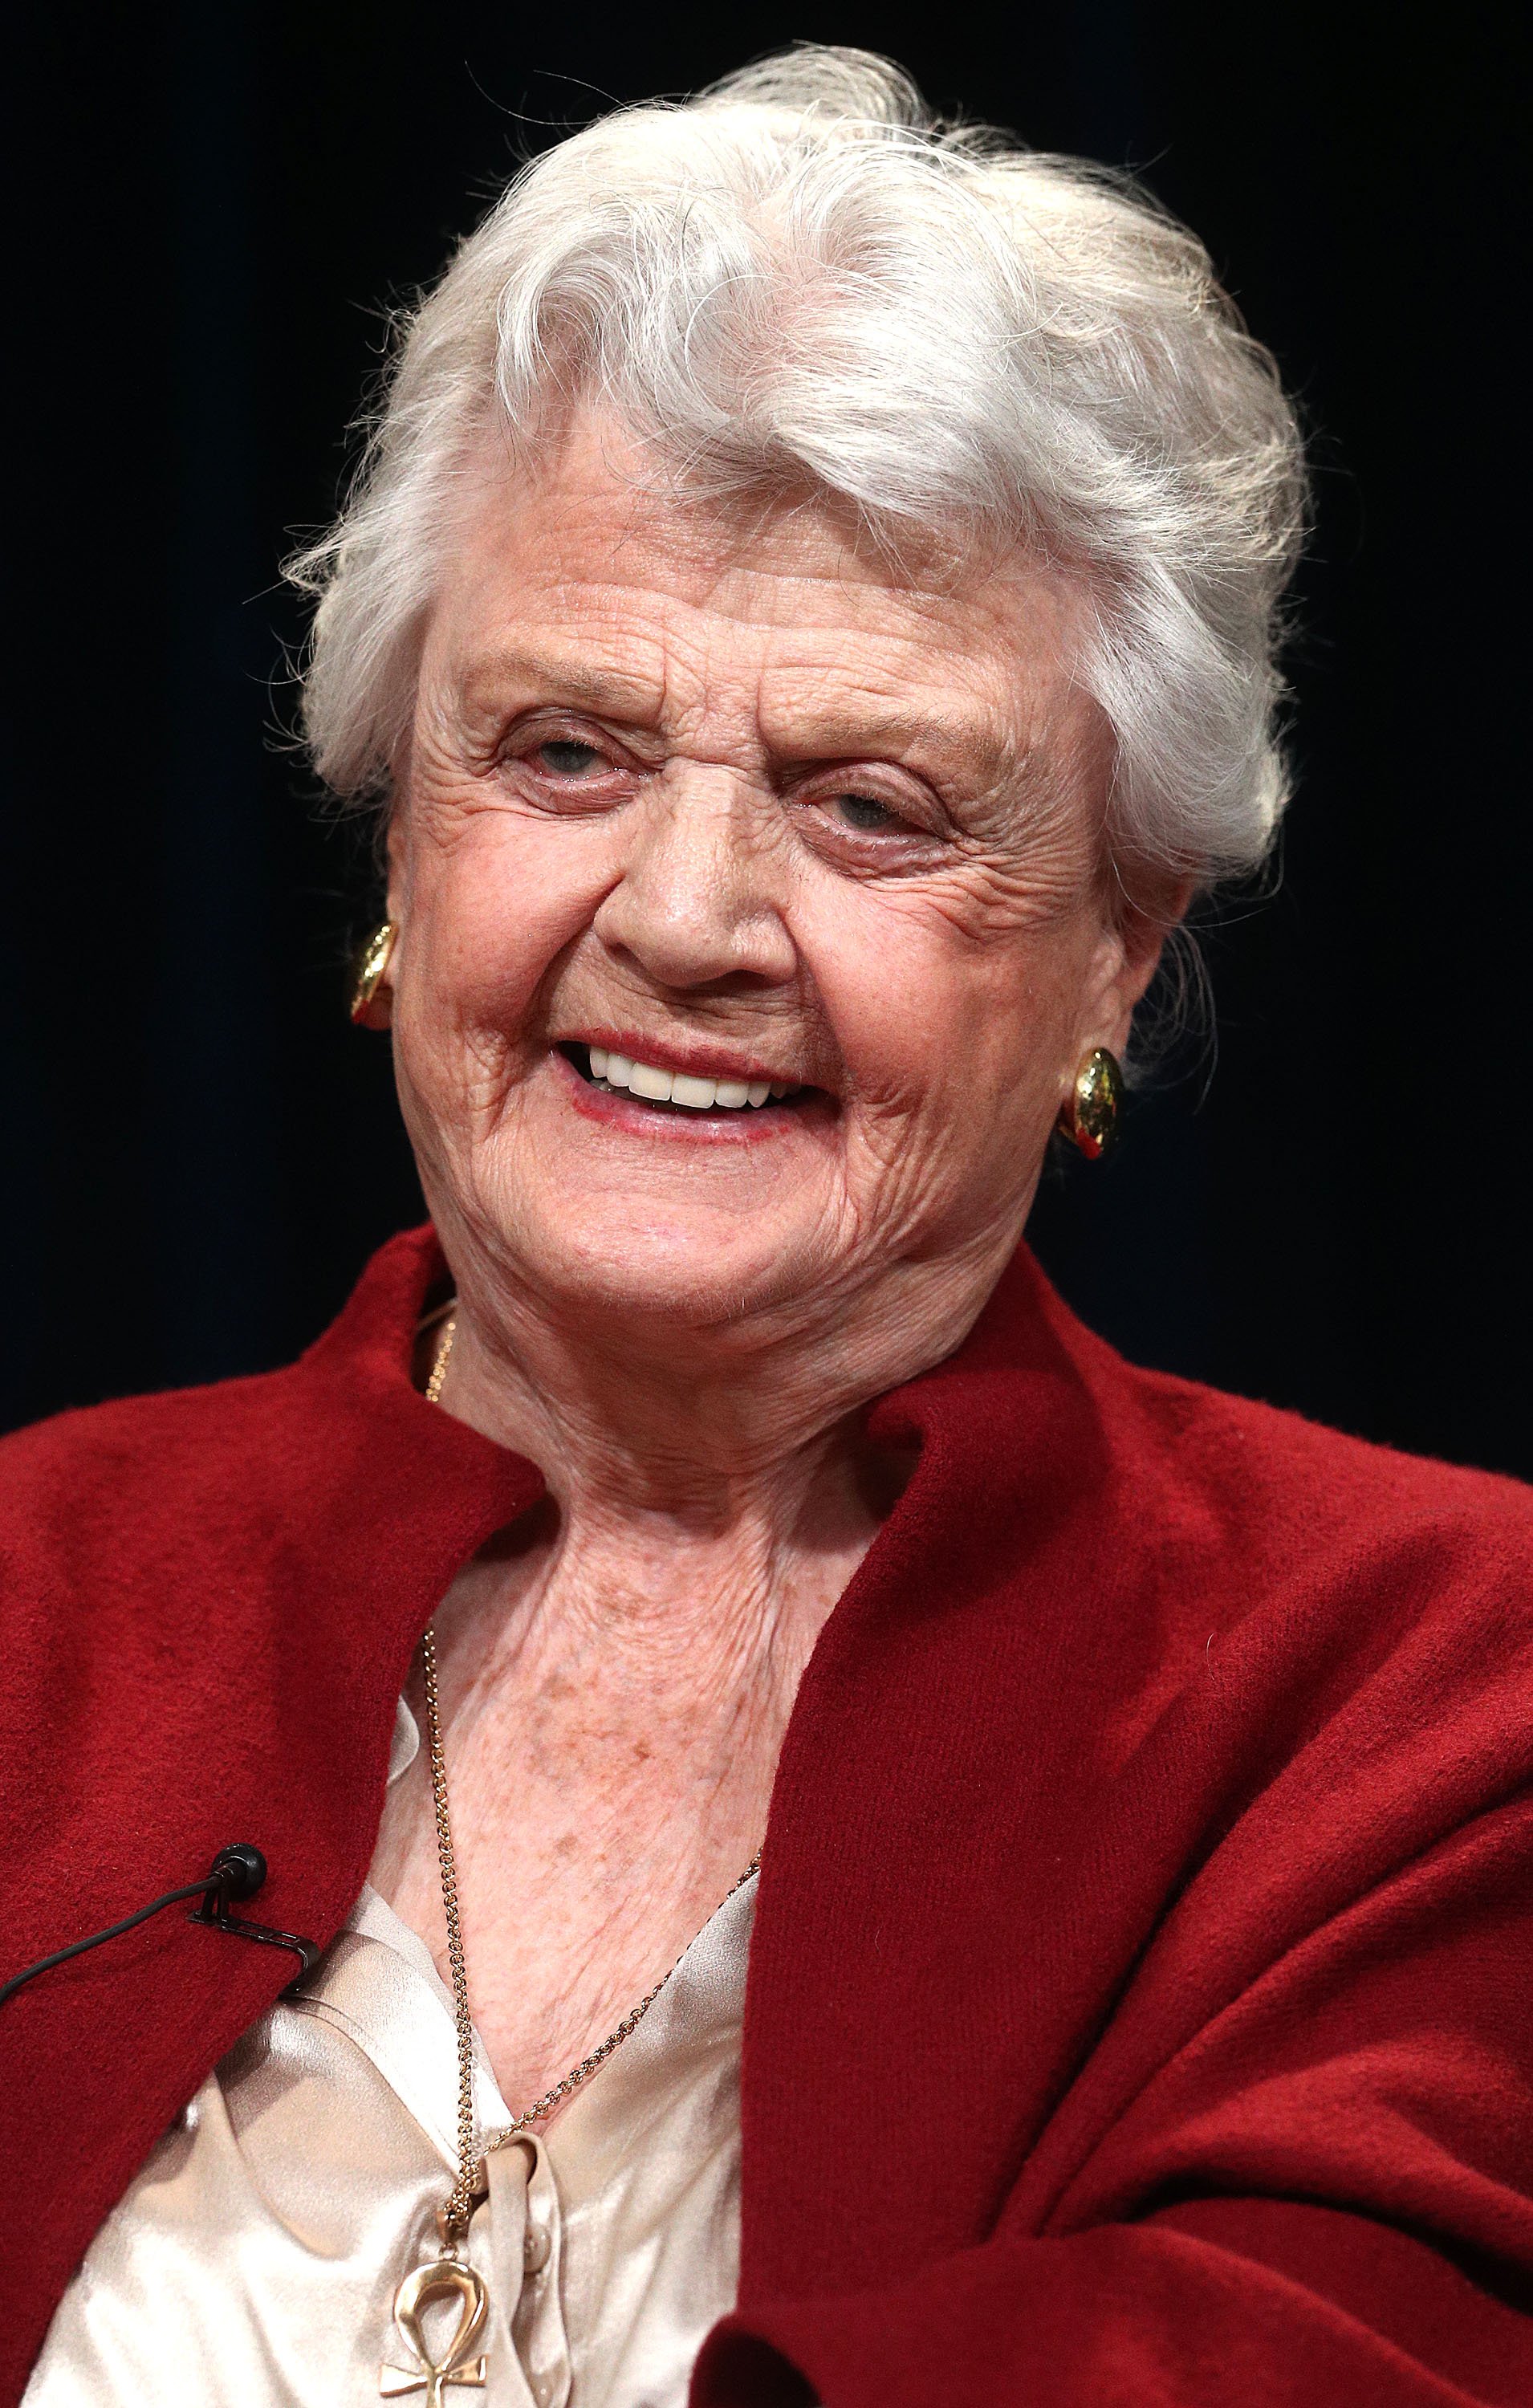 Angela Lansbury at the PBS segment of the Winter Television Critics Association Press Tour on January 16, 2018, in Pasadena, California | Source: Getty Images